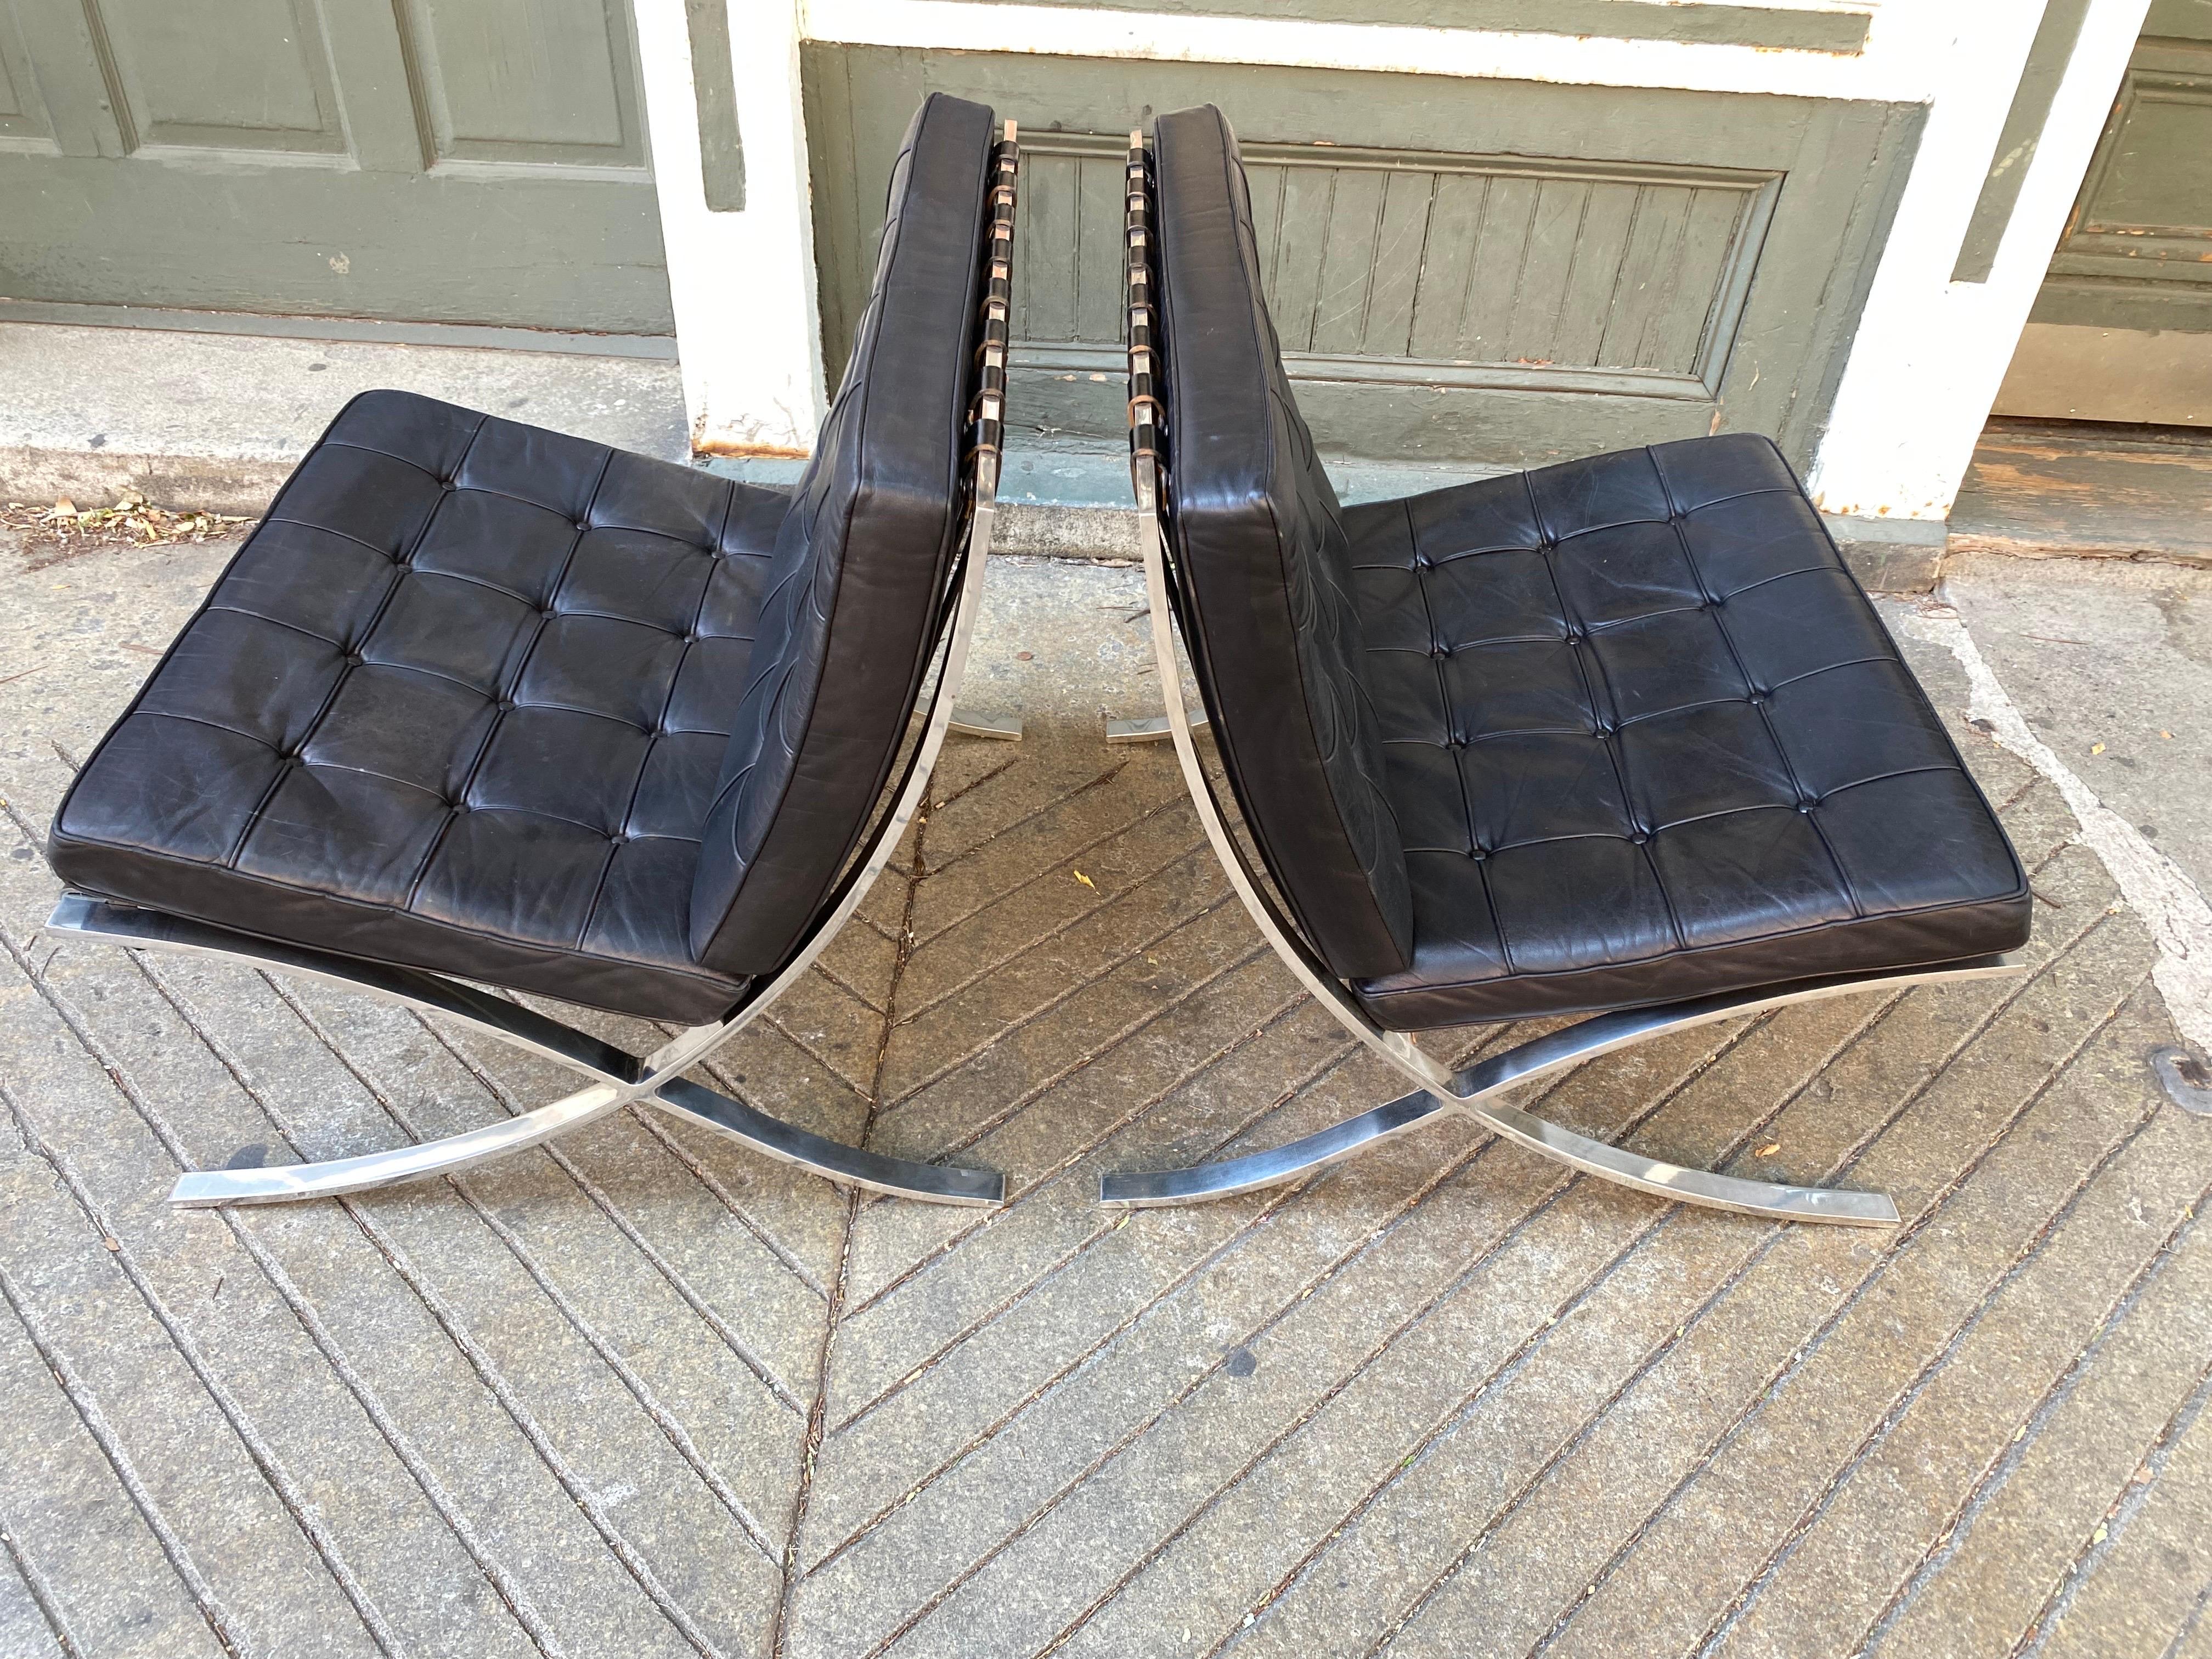 Knoll Mies Van Der Rohe Pair of Barcelona Chairs/ Stainless Steel Frames In Good Condition For Sale In Philadelphia, PA